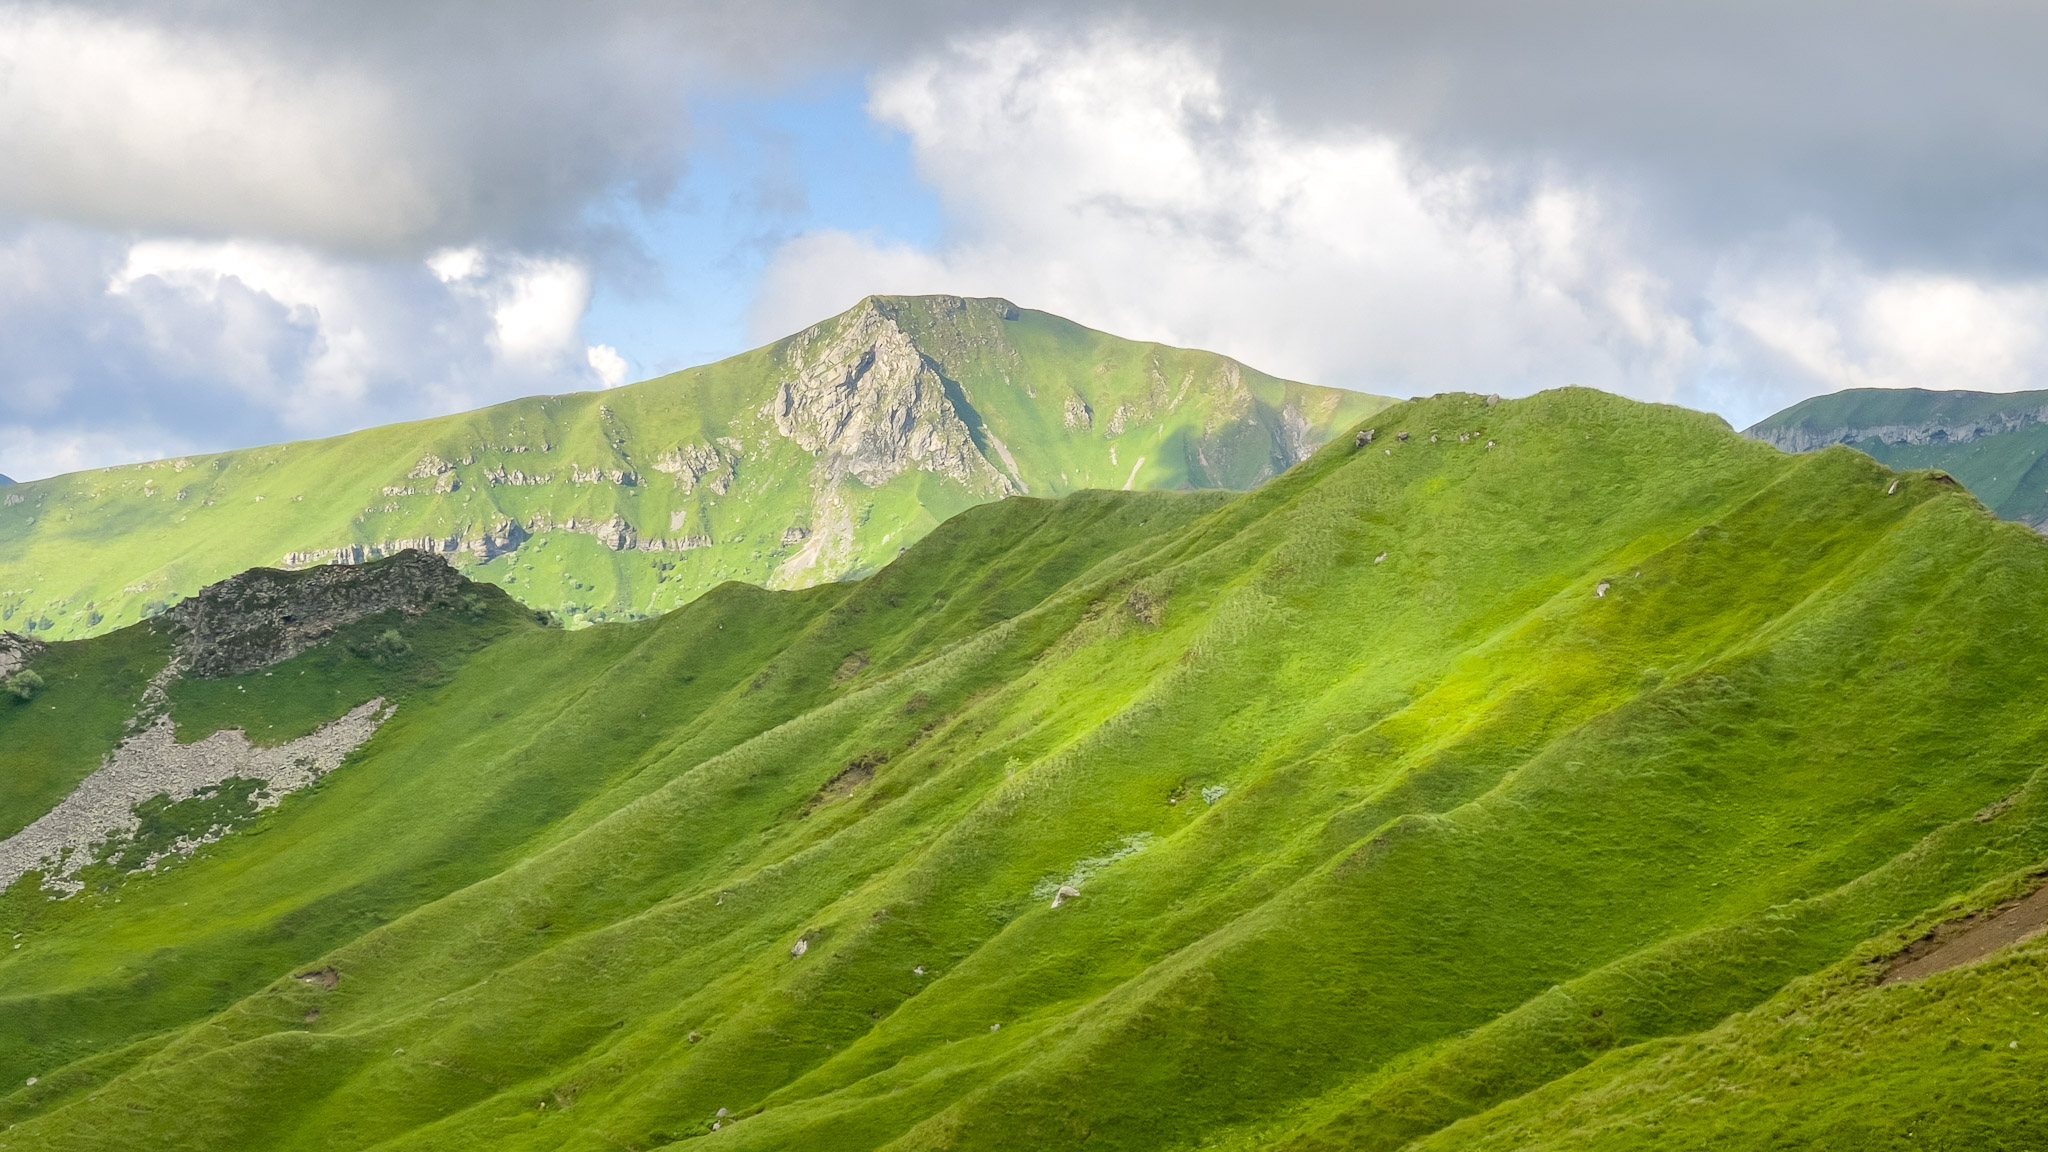 Discover the Mont Dore and the Massif du Sancy, the Val de Courre Valley, a peaceful valley to reach the summit of the Puy de Sancy